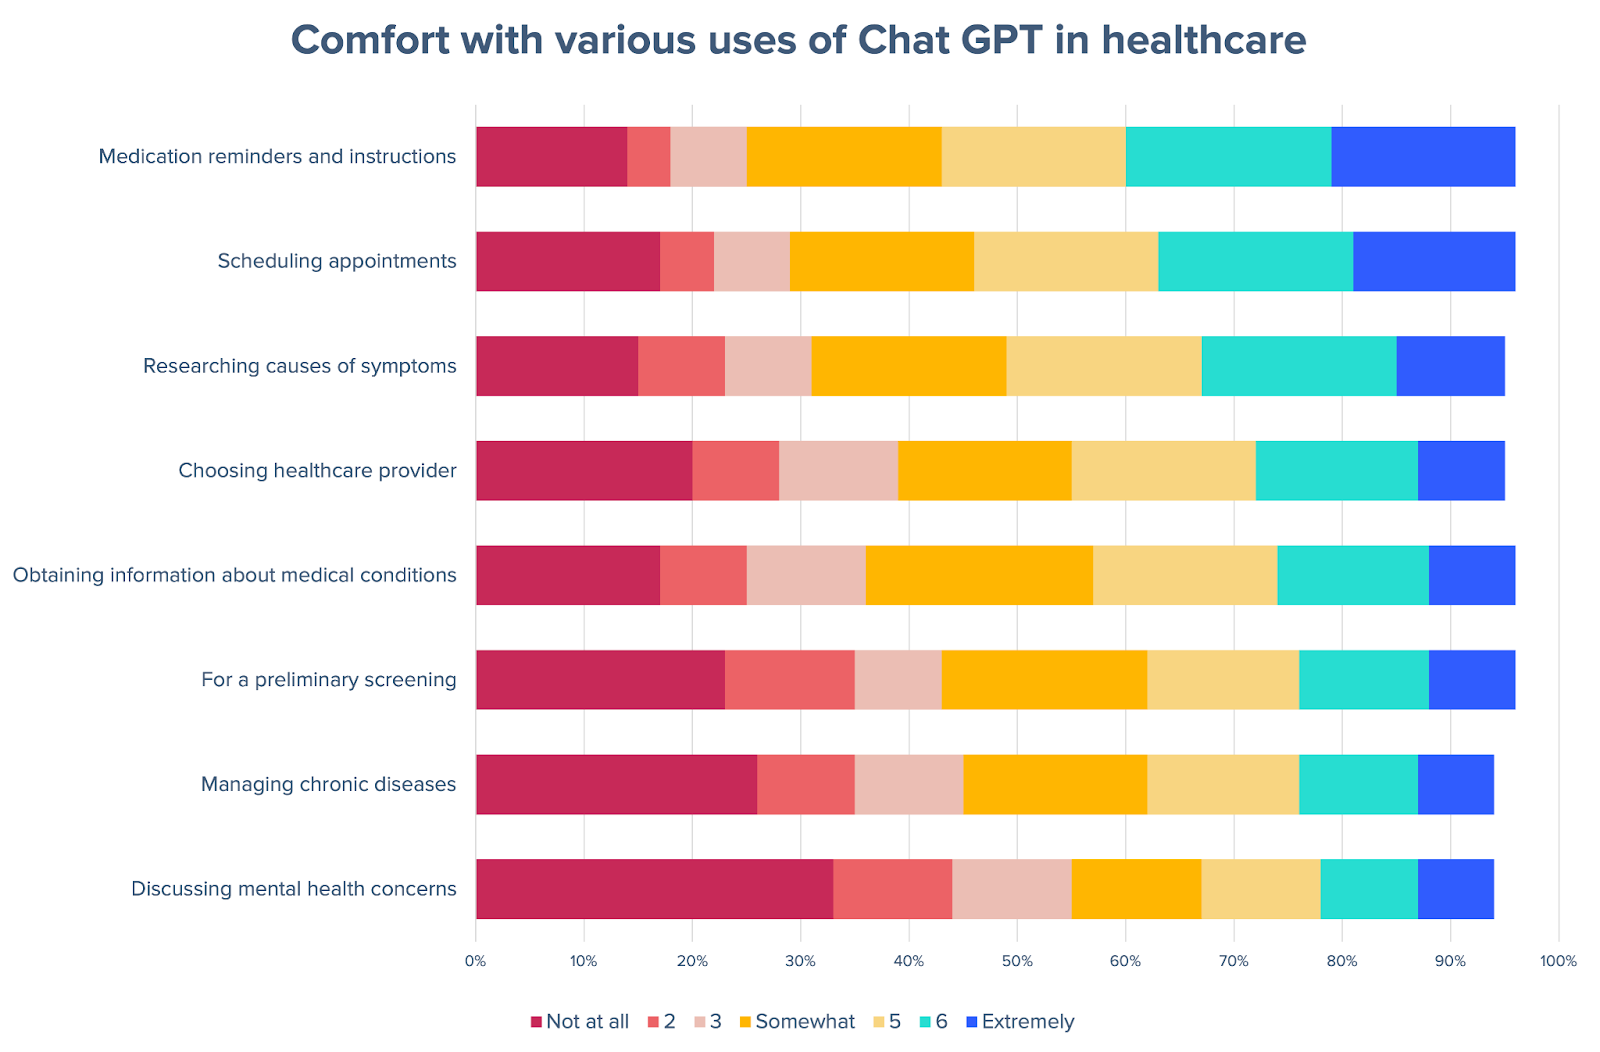 Chart shows comfort levels around the use of Chat GPT in various healthcare activities. Comfort was least bad for medication reminders and scheduling appointments. Discomfort was highest for discussing mental health and managing chronic diseases.